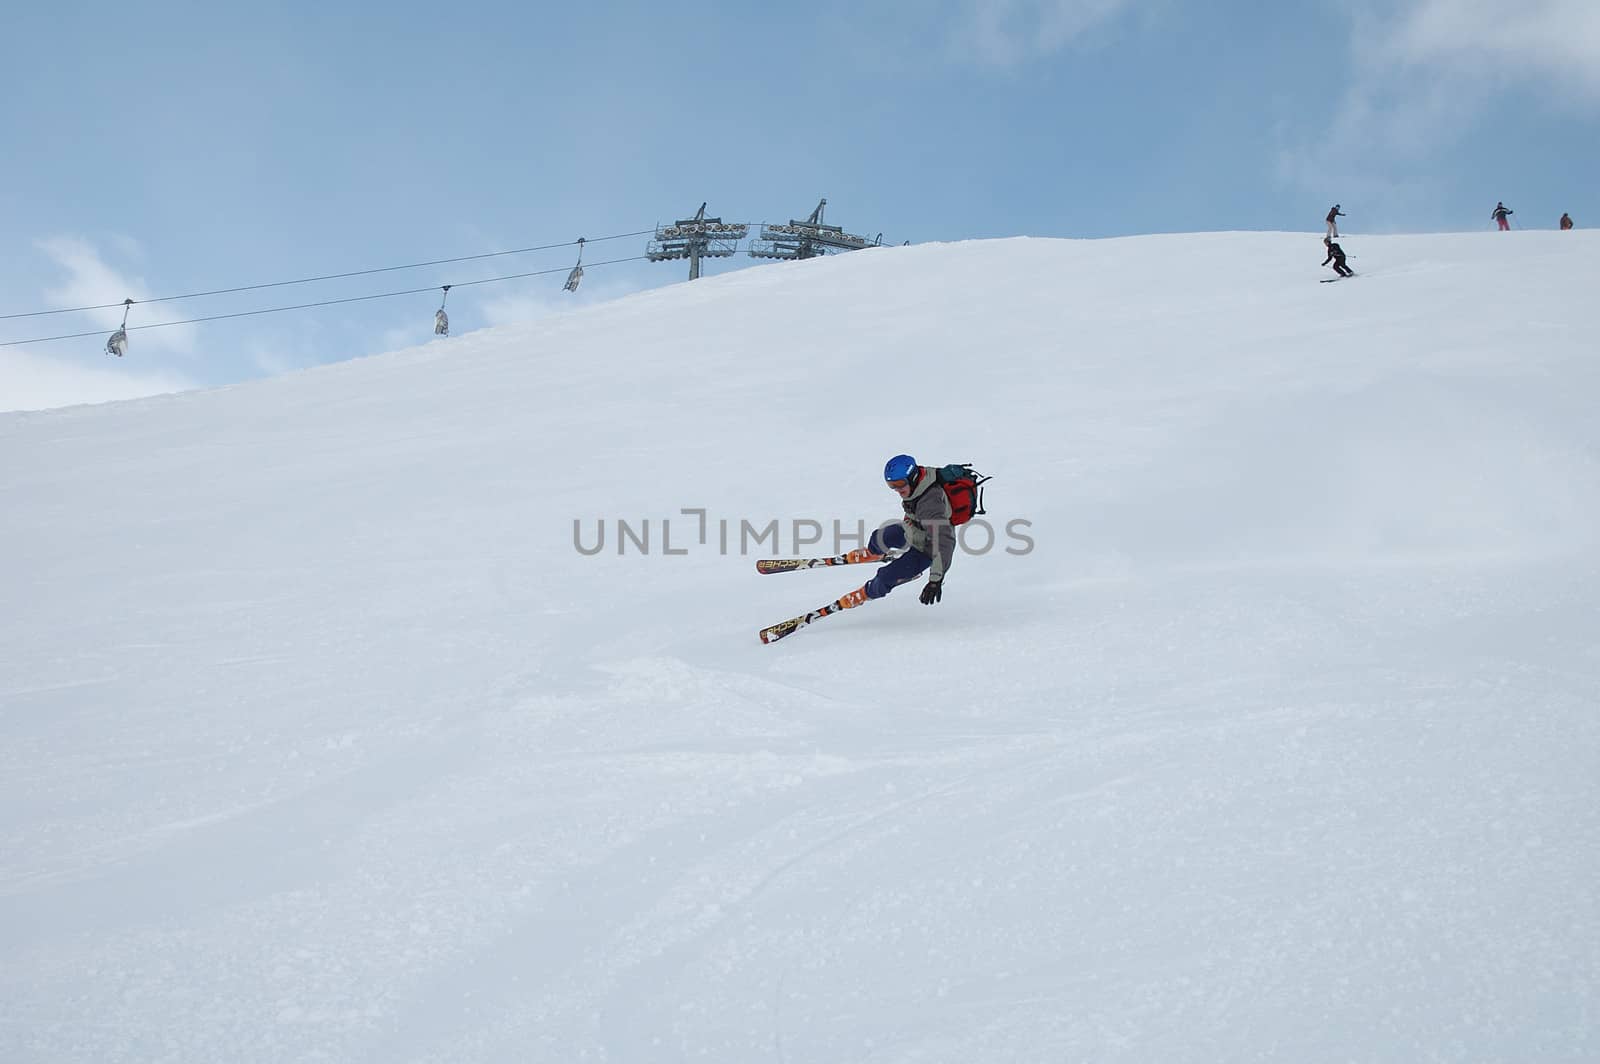 Skier's fall on the slope in Livigno Italy